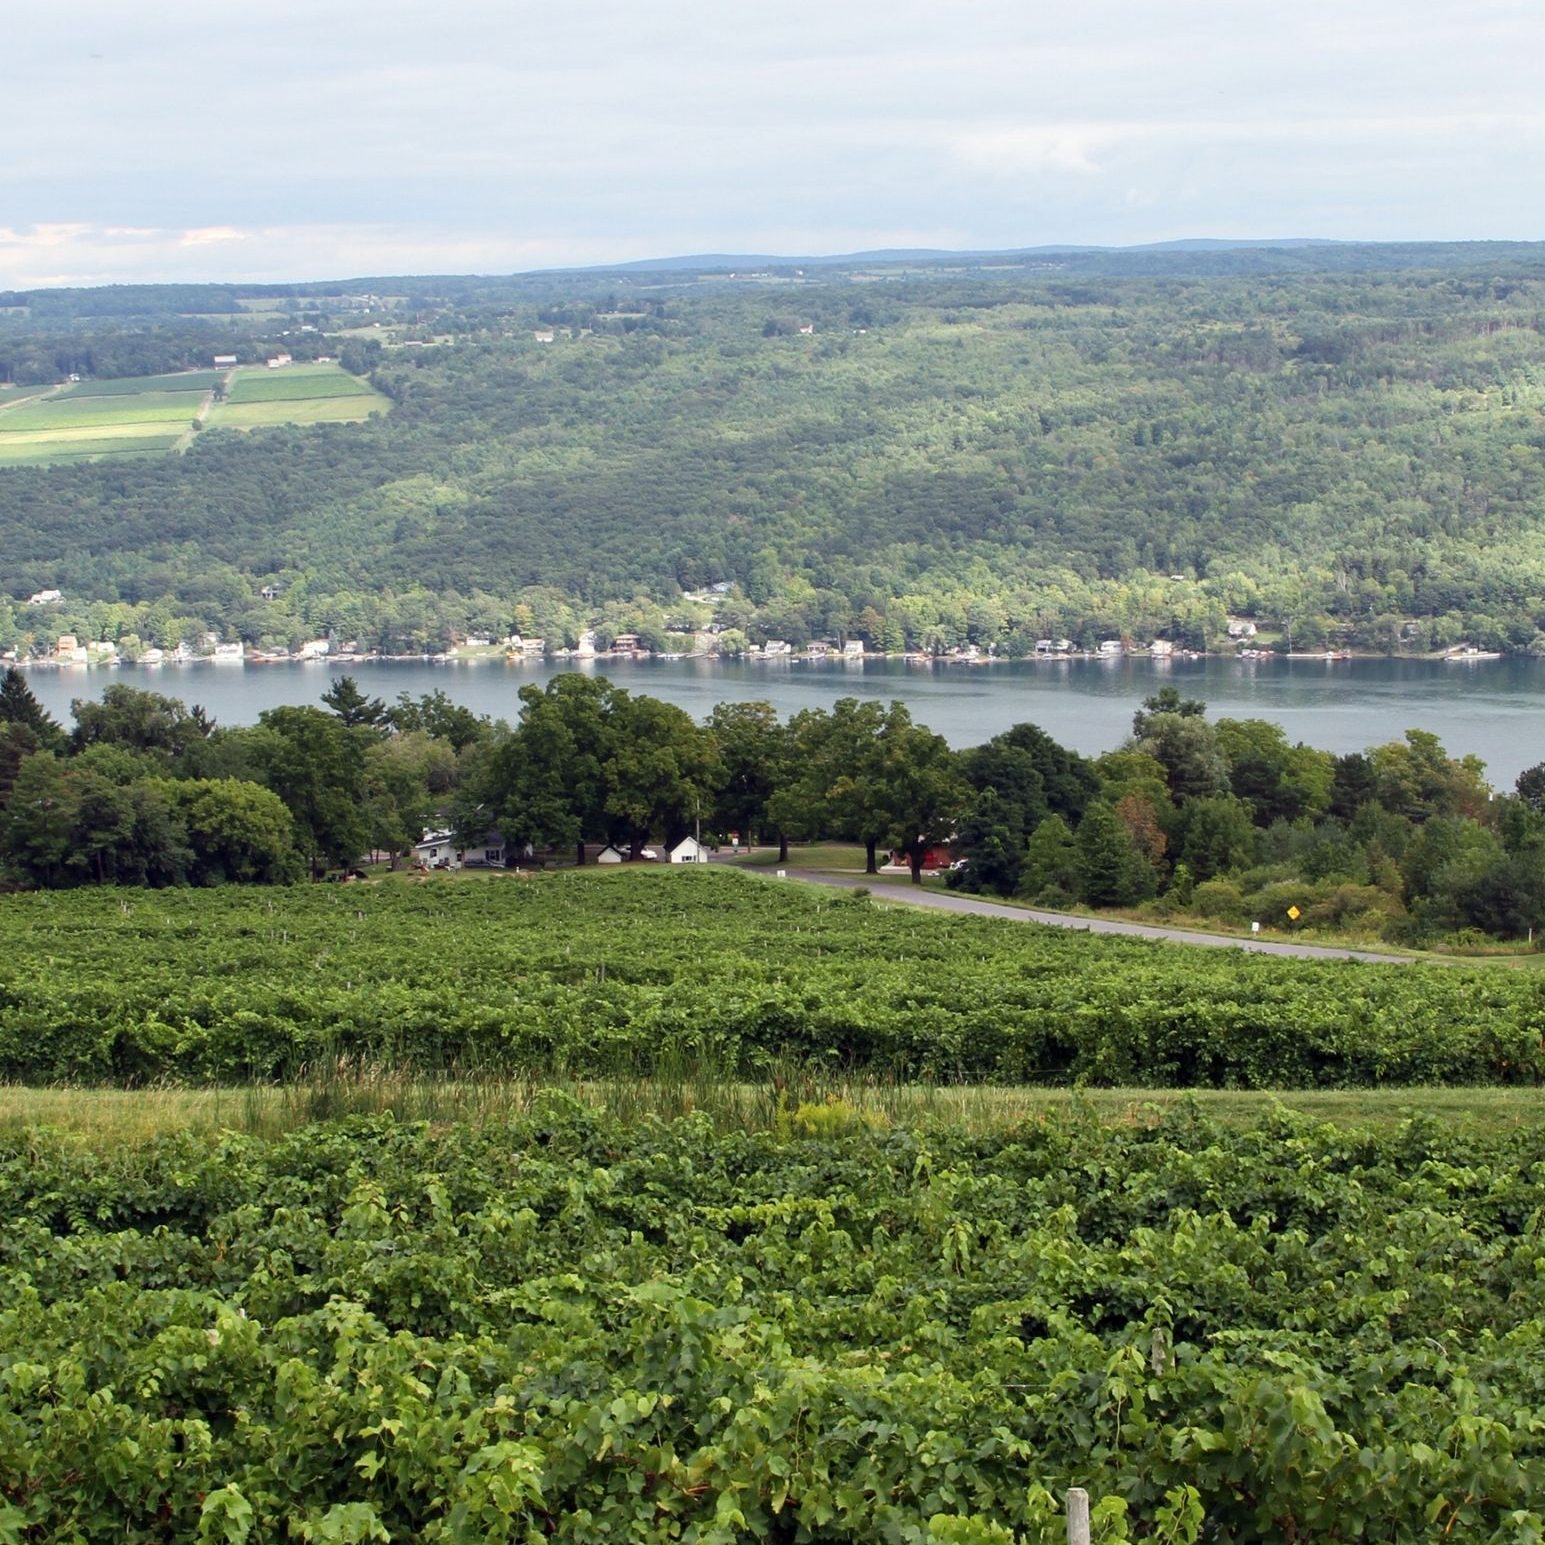 Wineries throughout the Finger Lakes